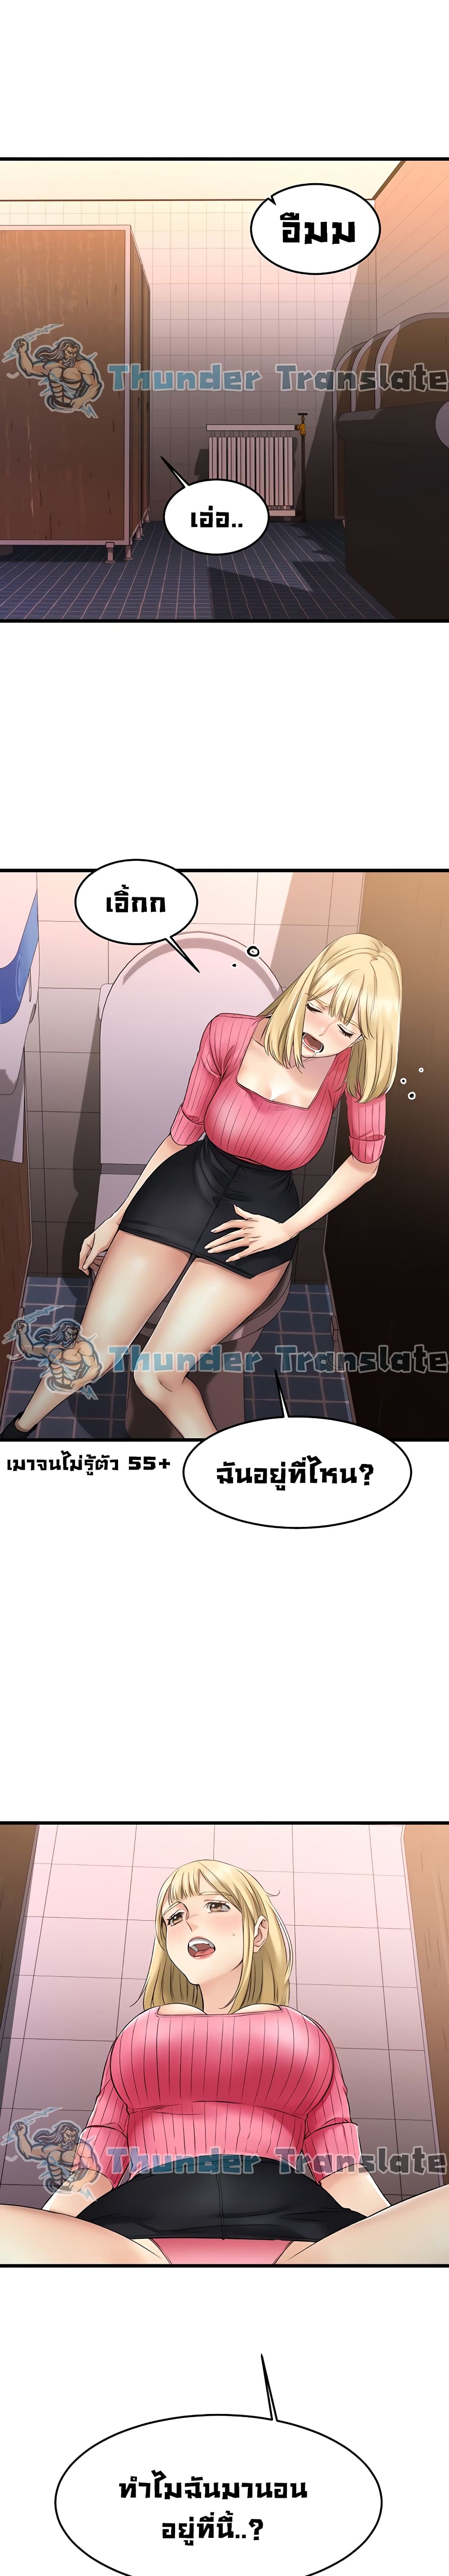 My Female Friend Who Crossed The Line 3 ภาพที่ 22